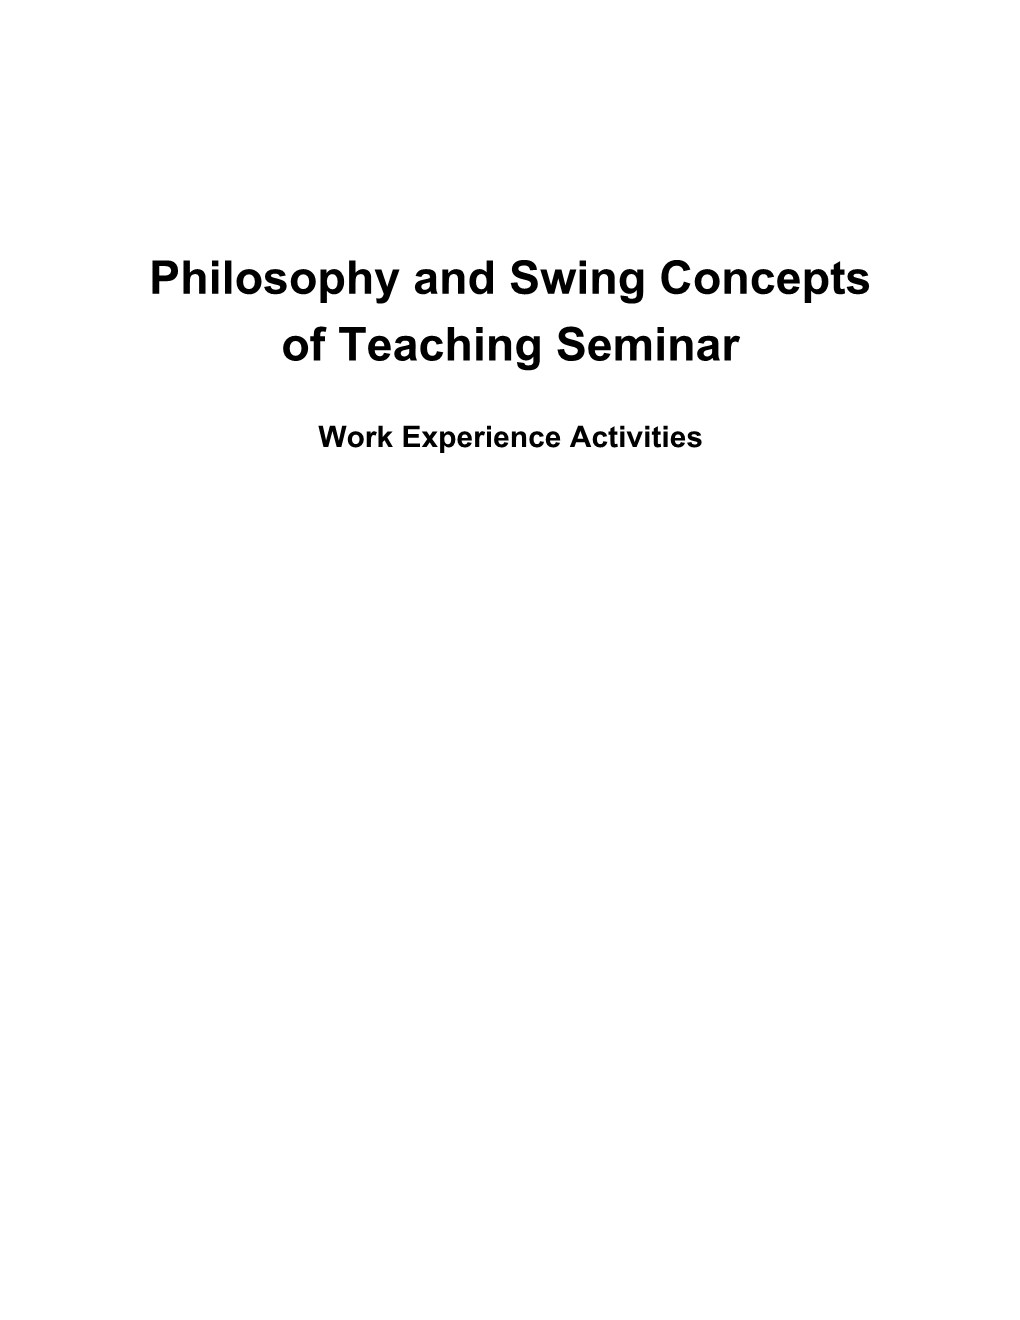 Philosophy and Swing Concepts of Teaching Seminar